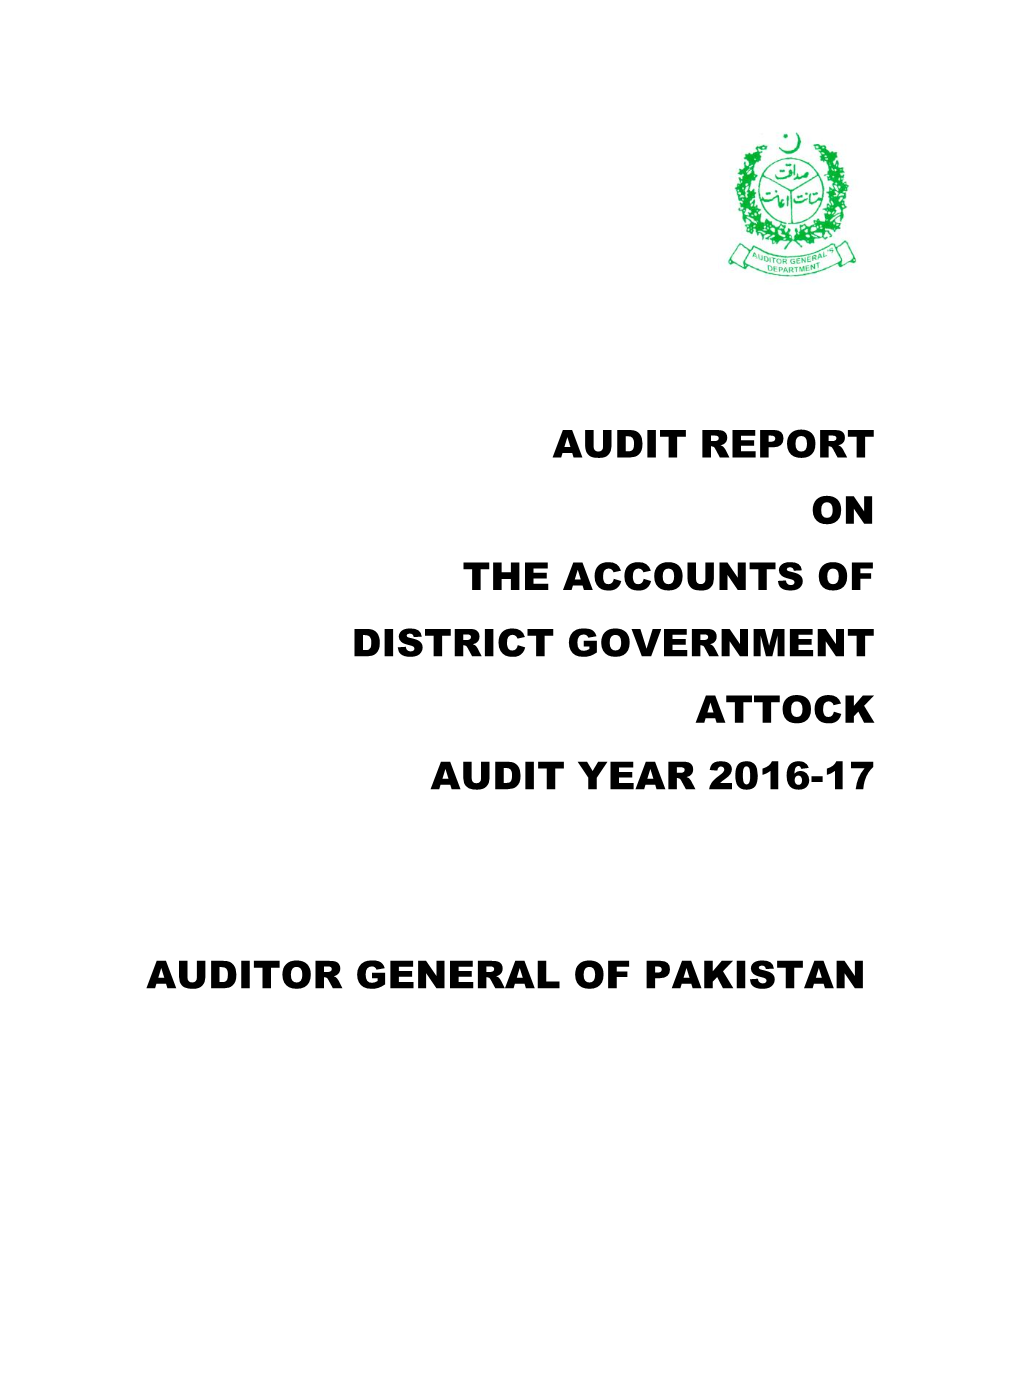 Audit Report on the Accounts of District Government Attock Audit Year 2016-17